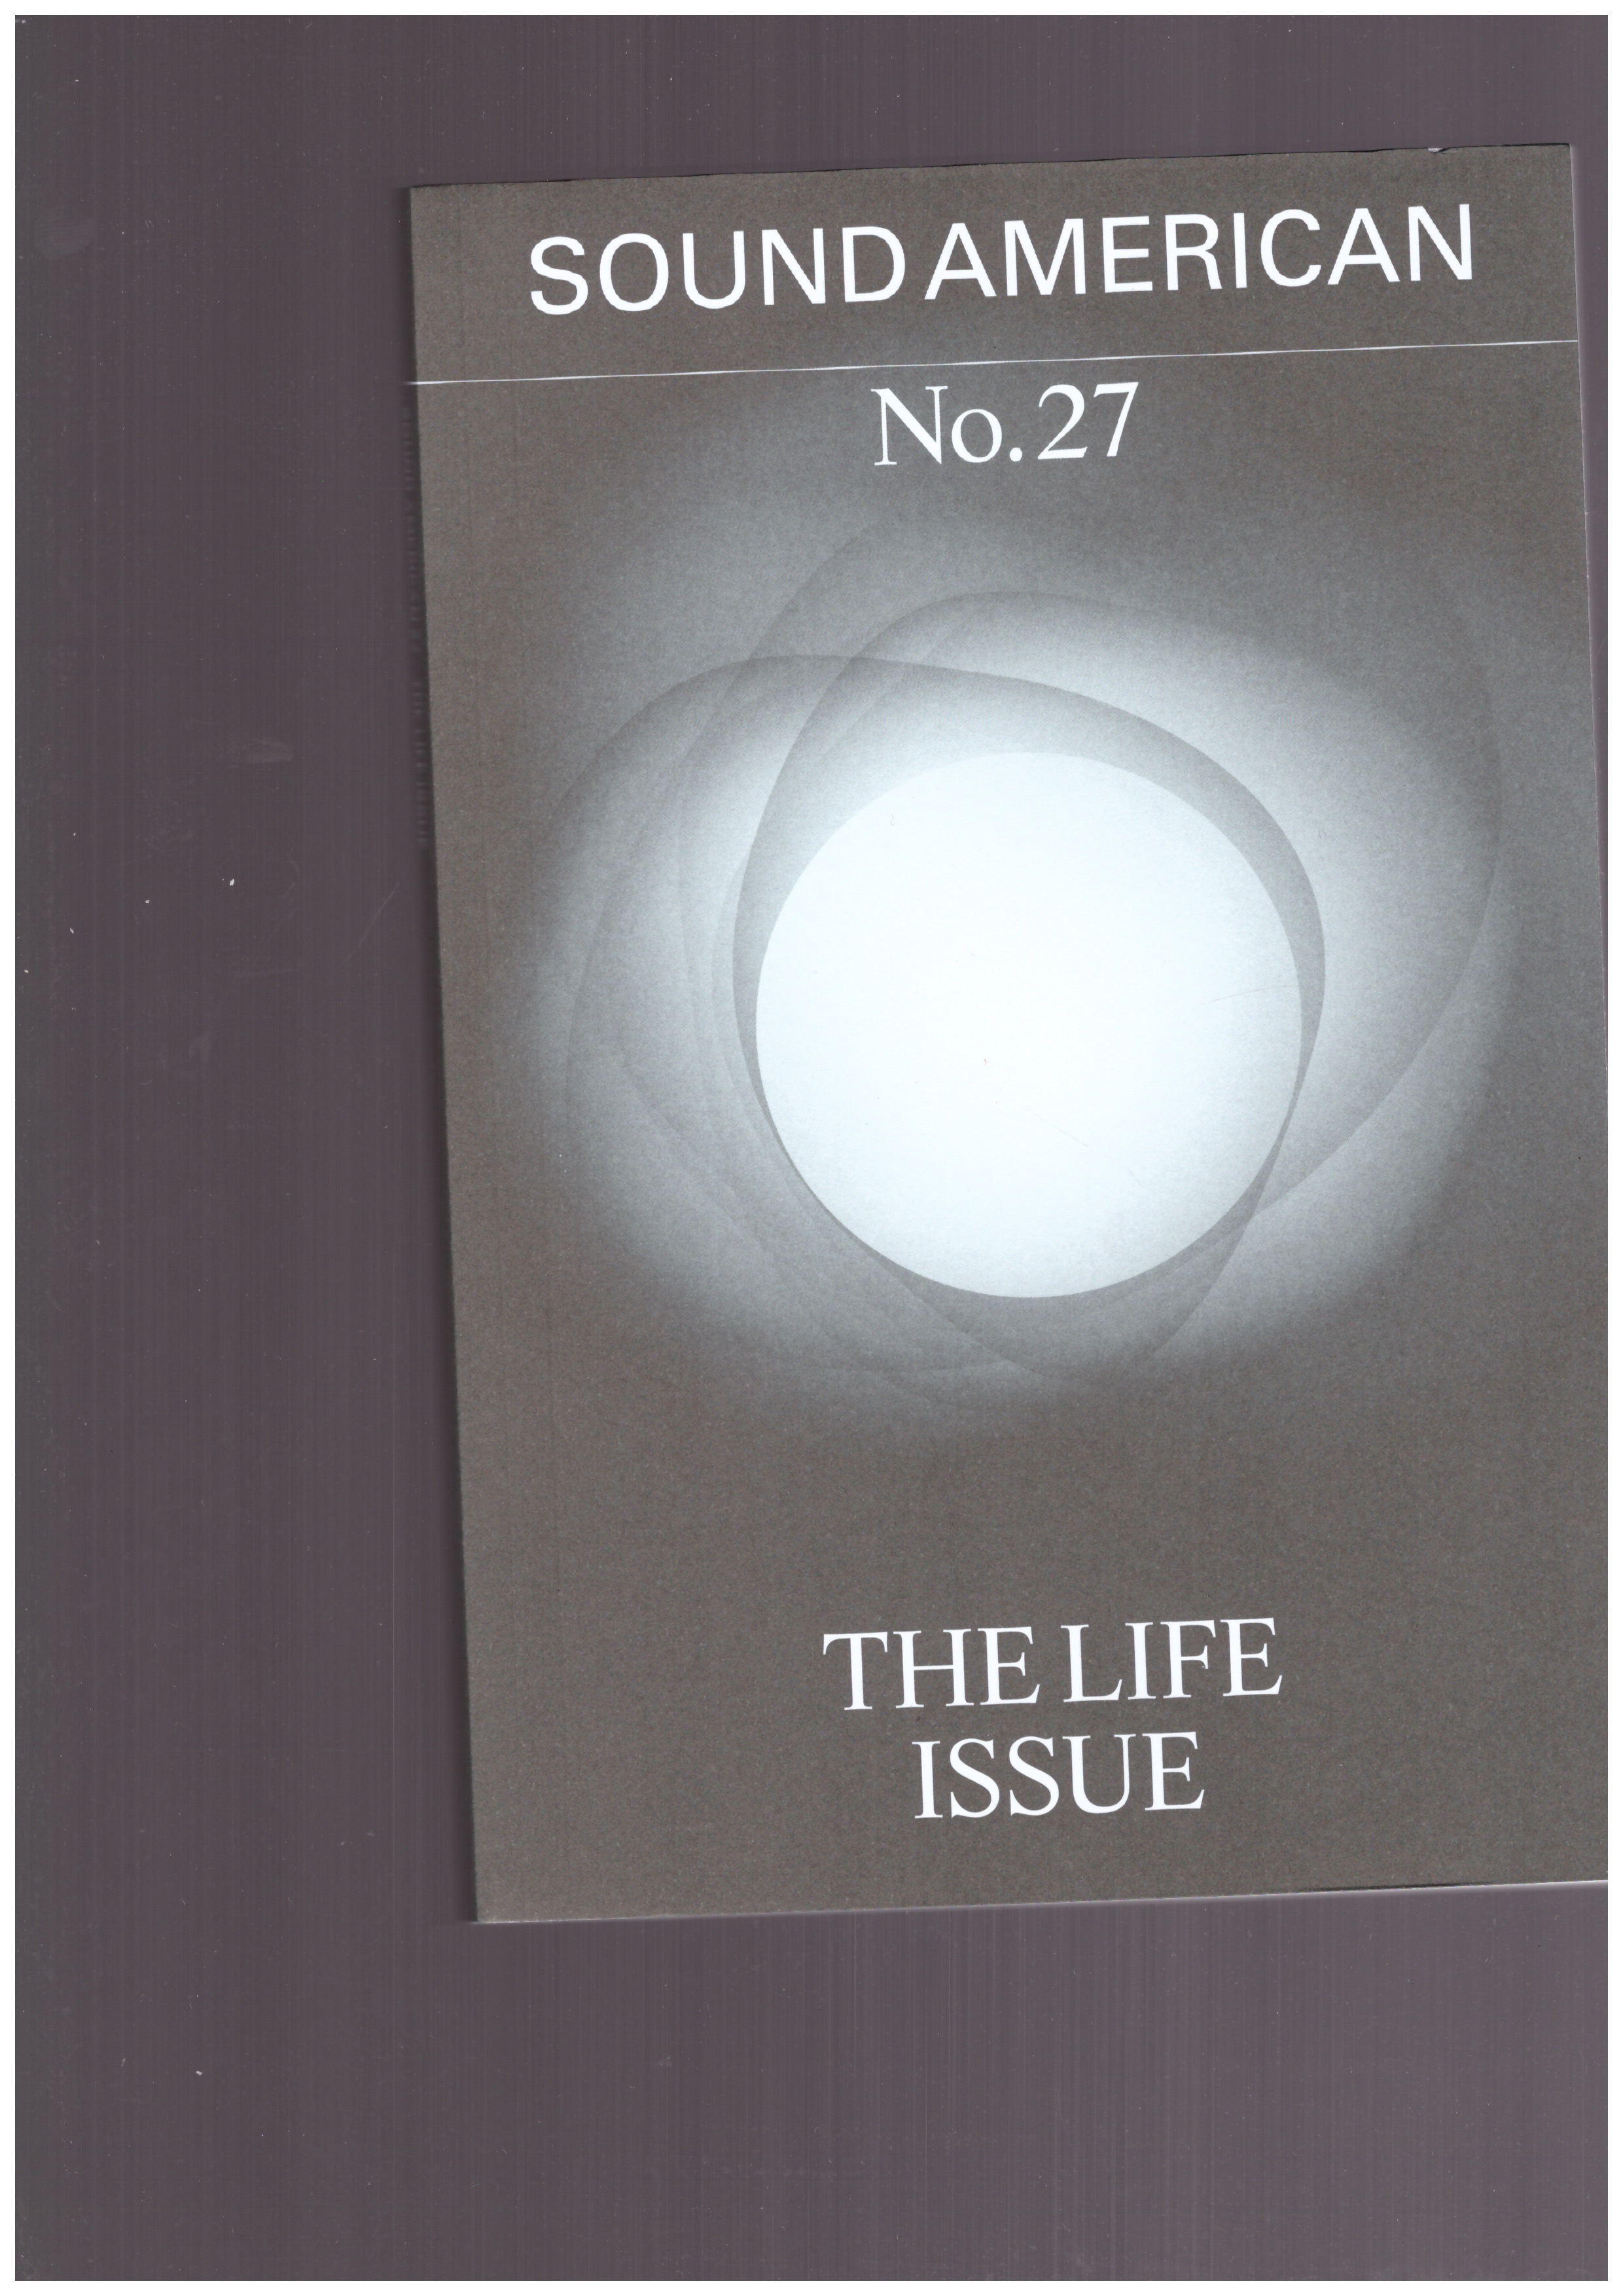 WOOLEY, Nate (ed.) - Sound American n° 27 – The Life Issue